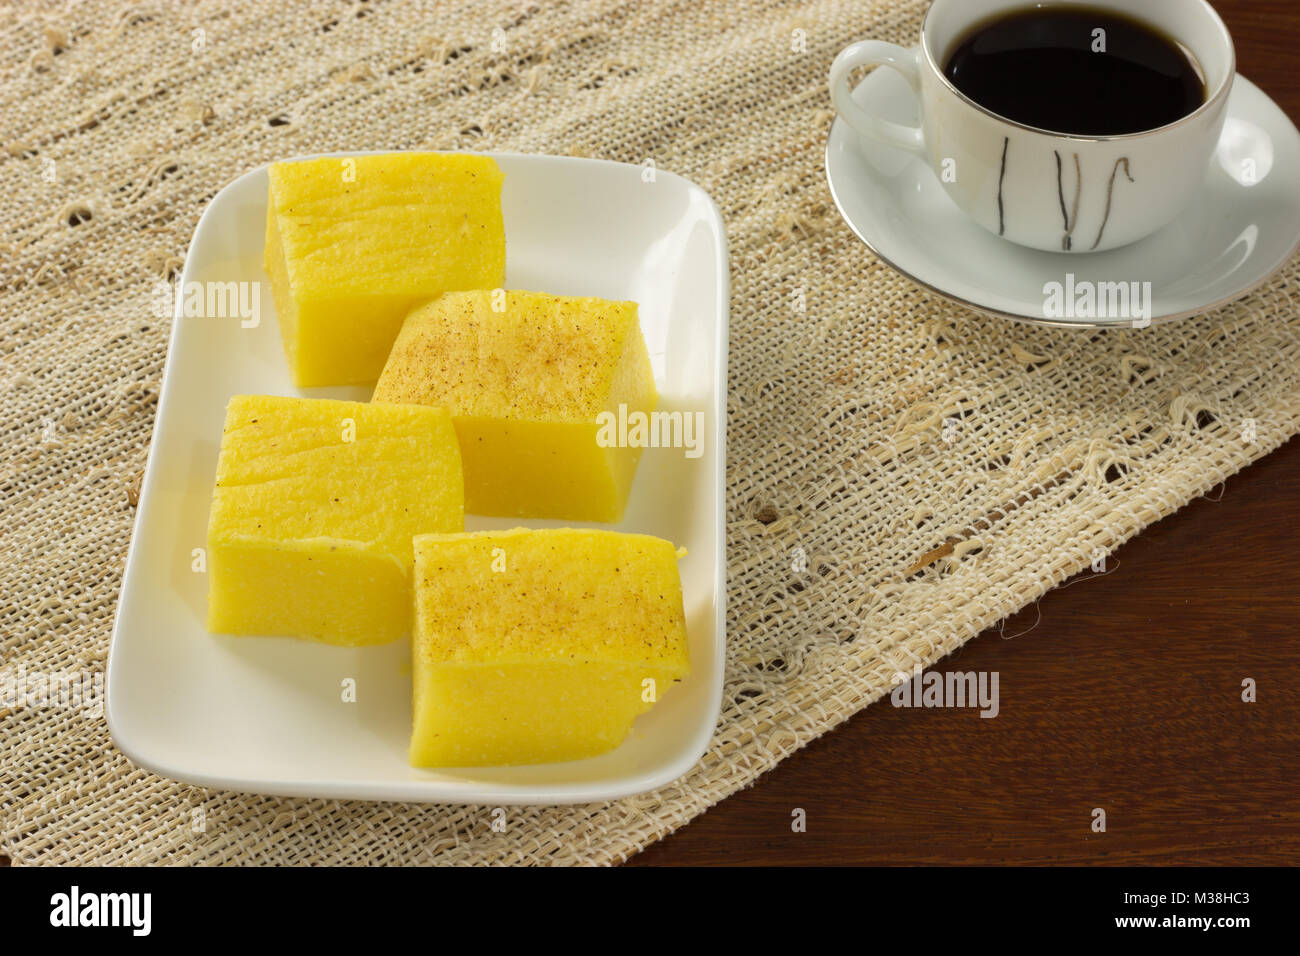 Pamonha, canjica/curau tradicional brazilian food. Tasty and delicius. Cheap street food, Eat in the breakfast or afternoon snack. made with corn Stock Photo